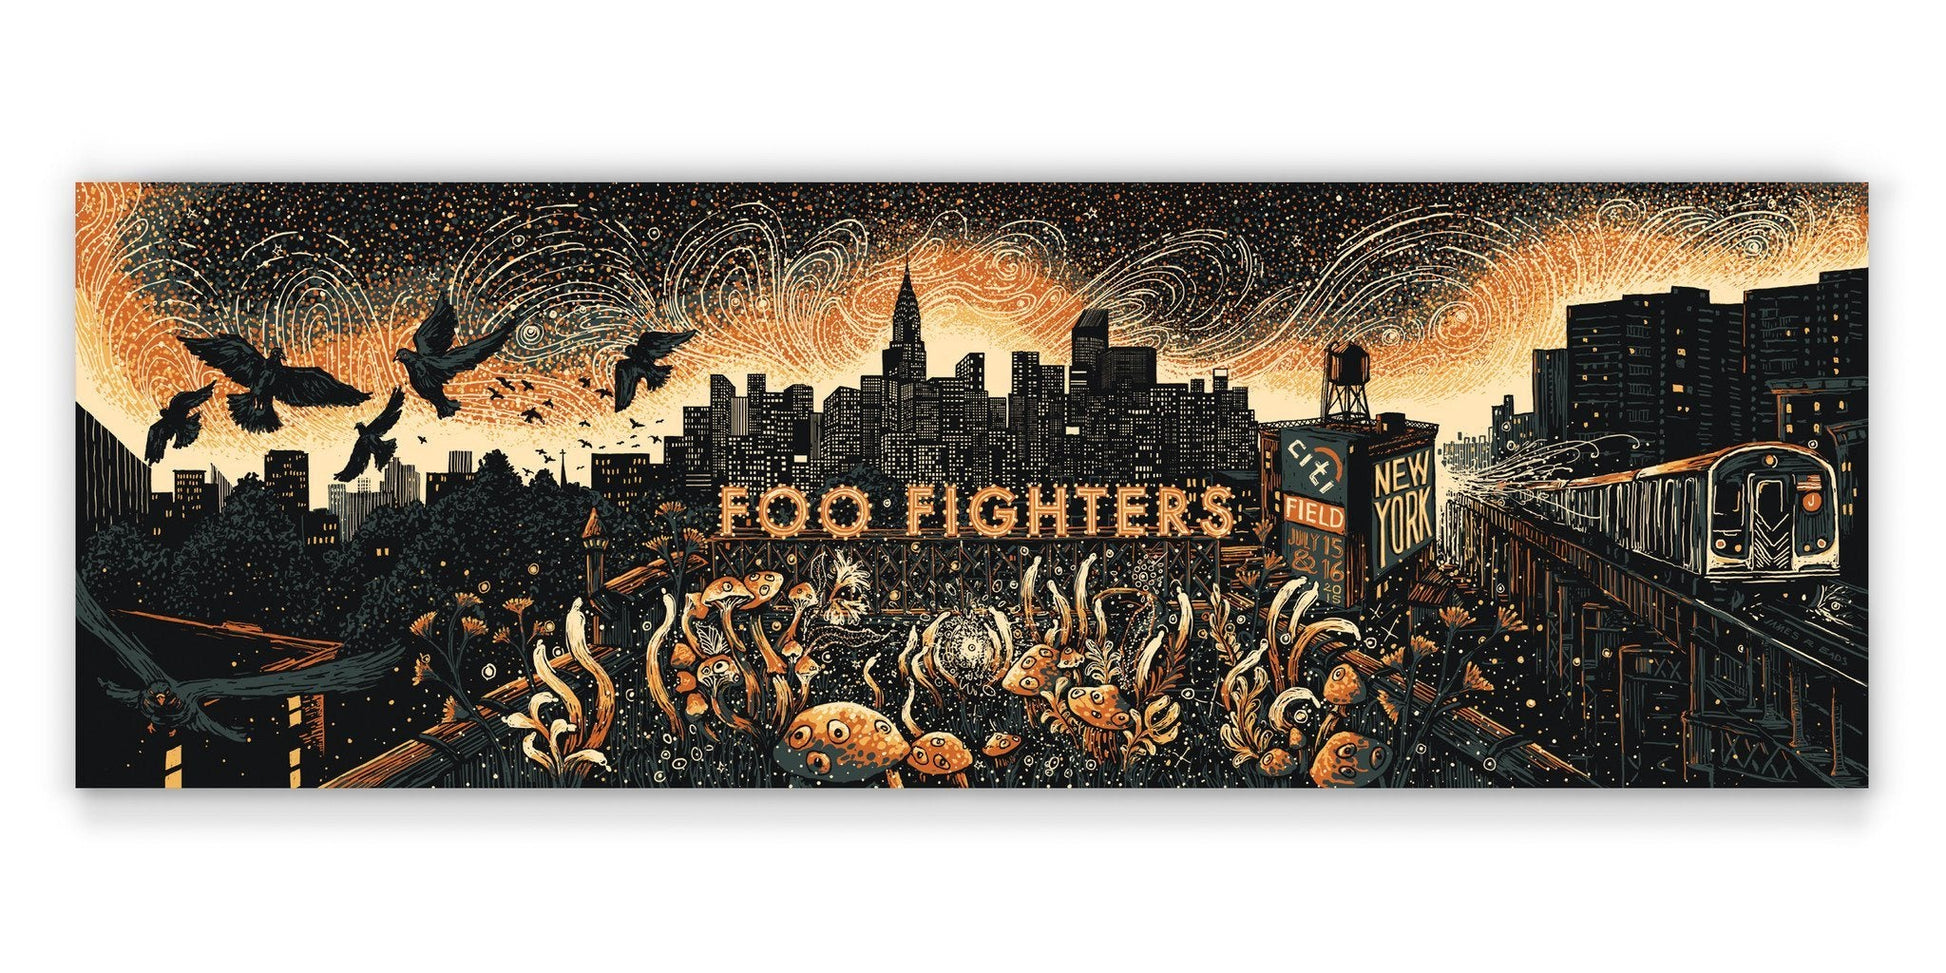 Foo Fighters NYC Sunset Variant (AP Edition of 40) Print James R. Eads